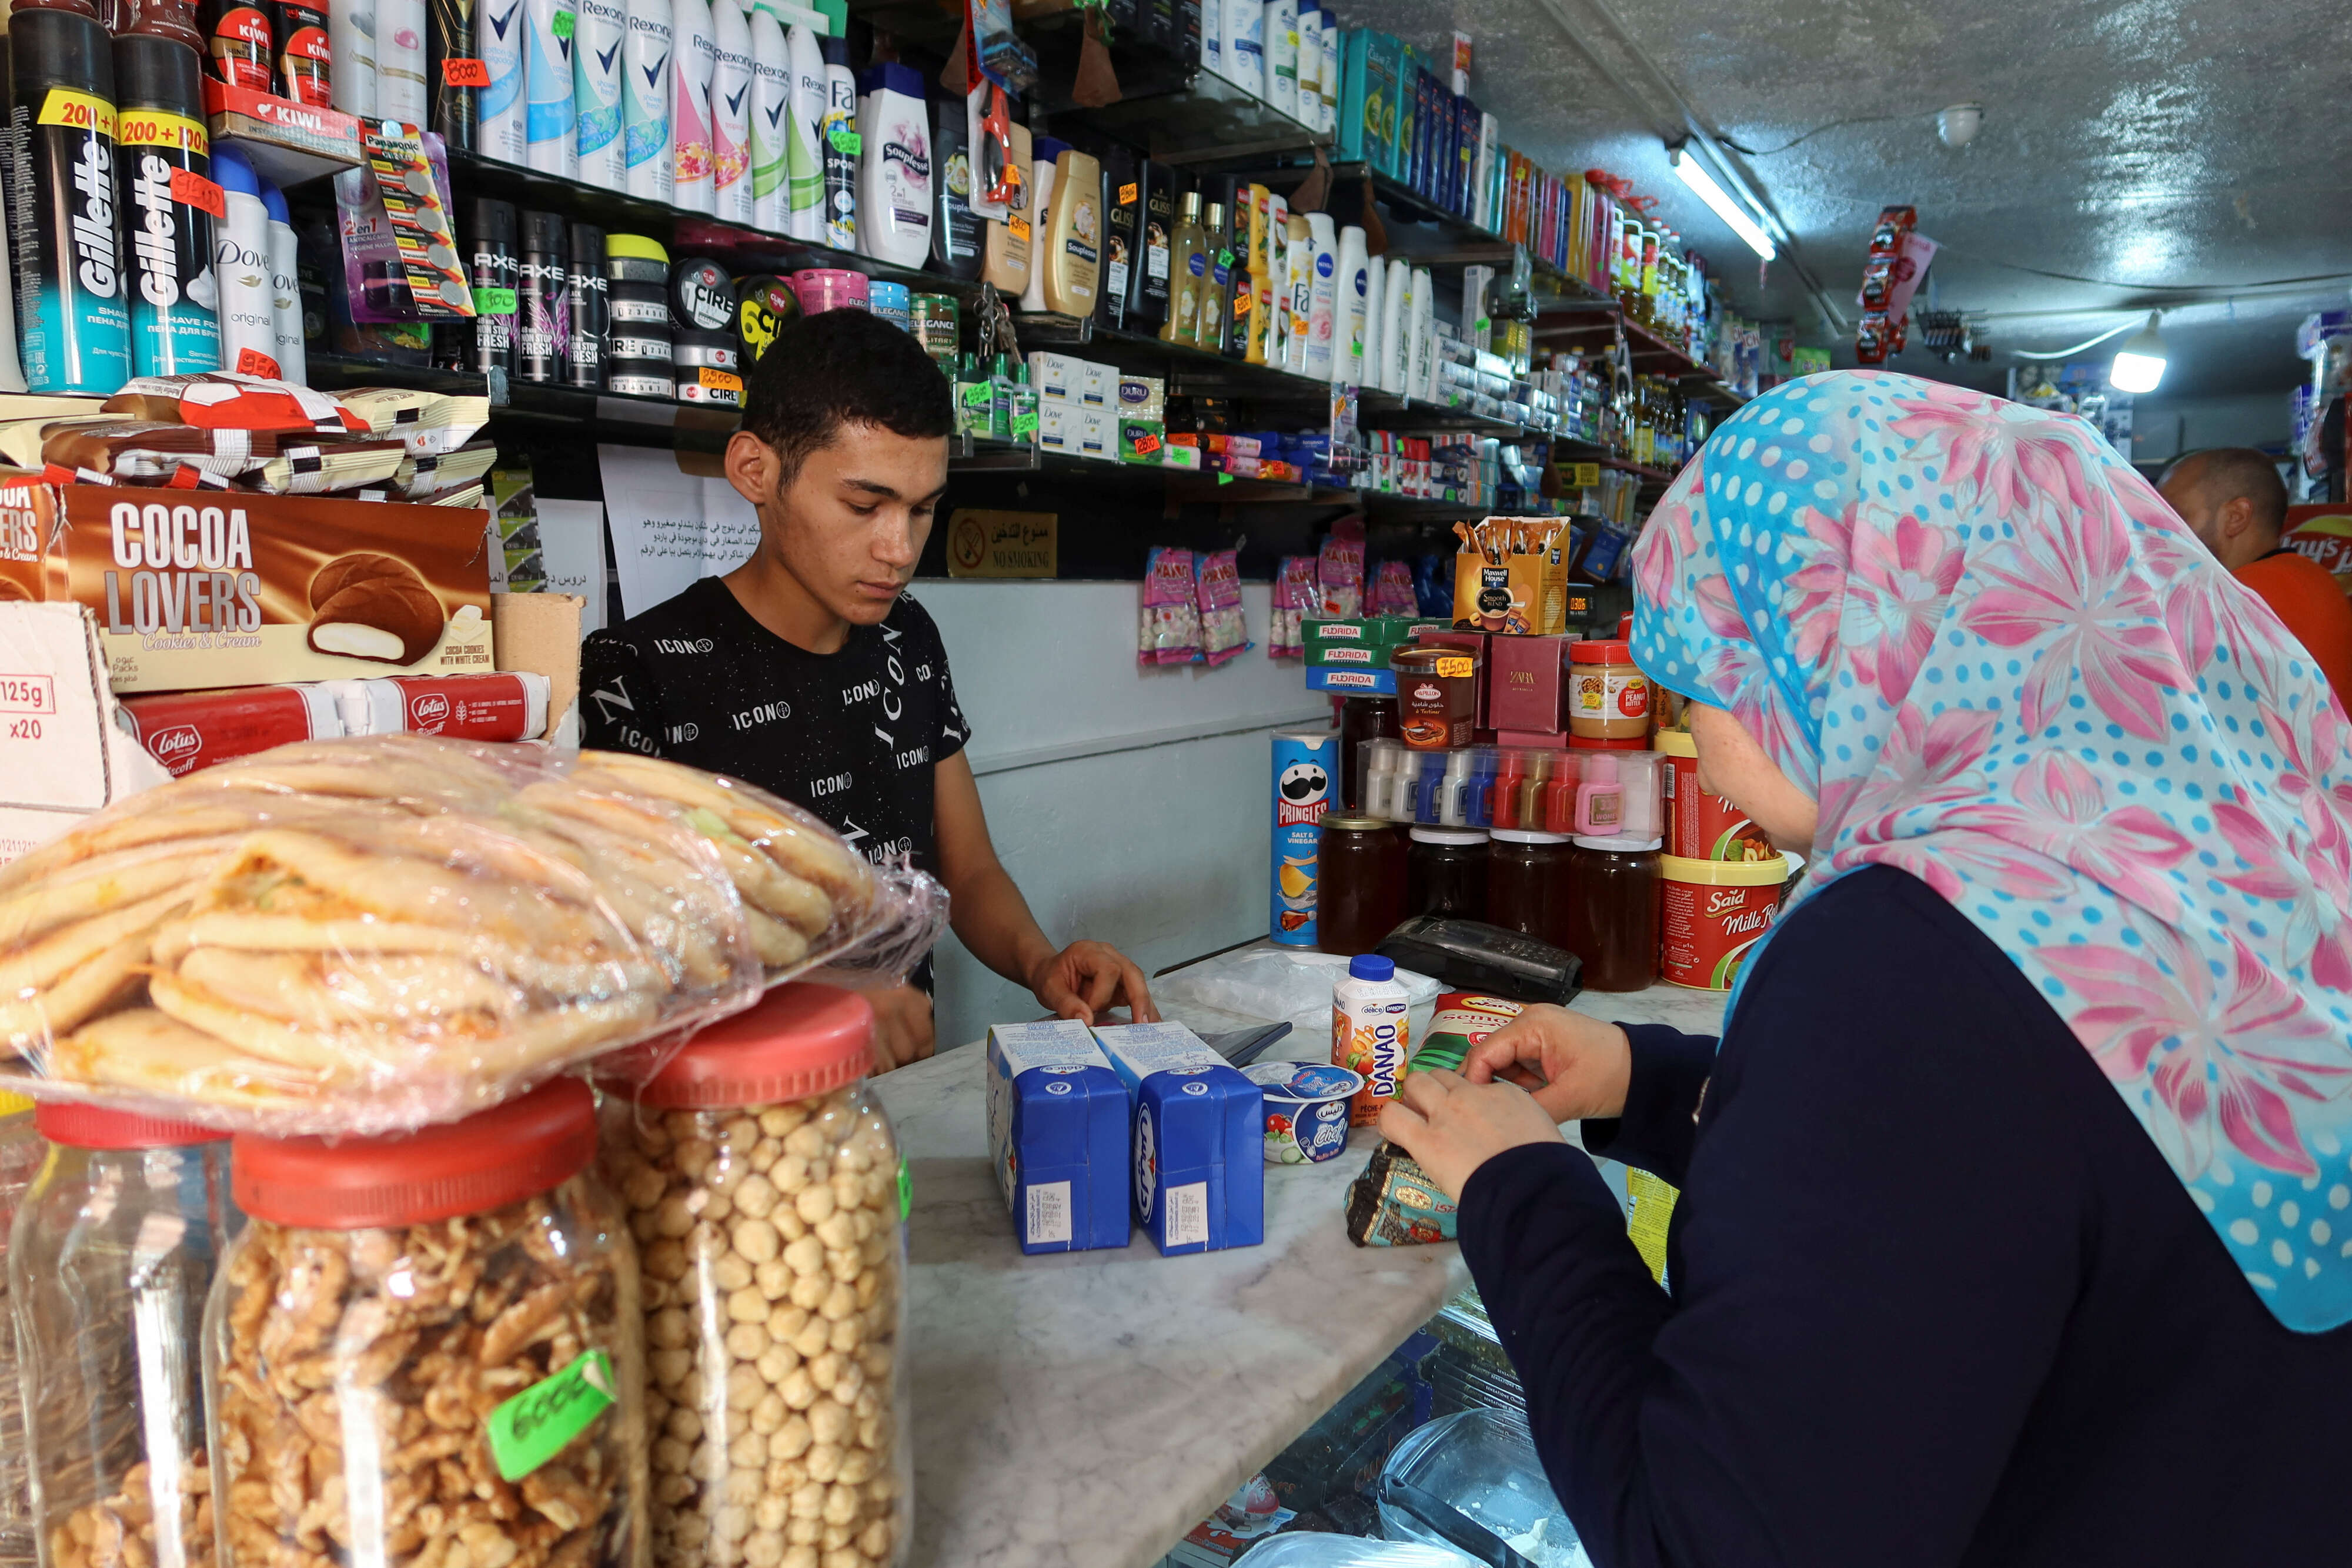 A woman shops at a grocery store in Tunis